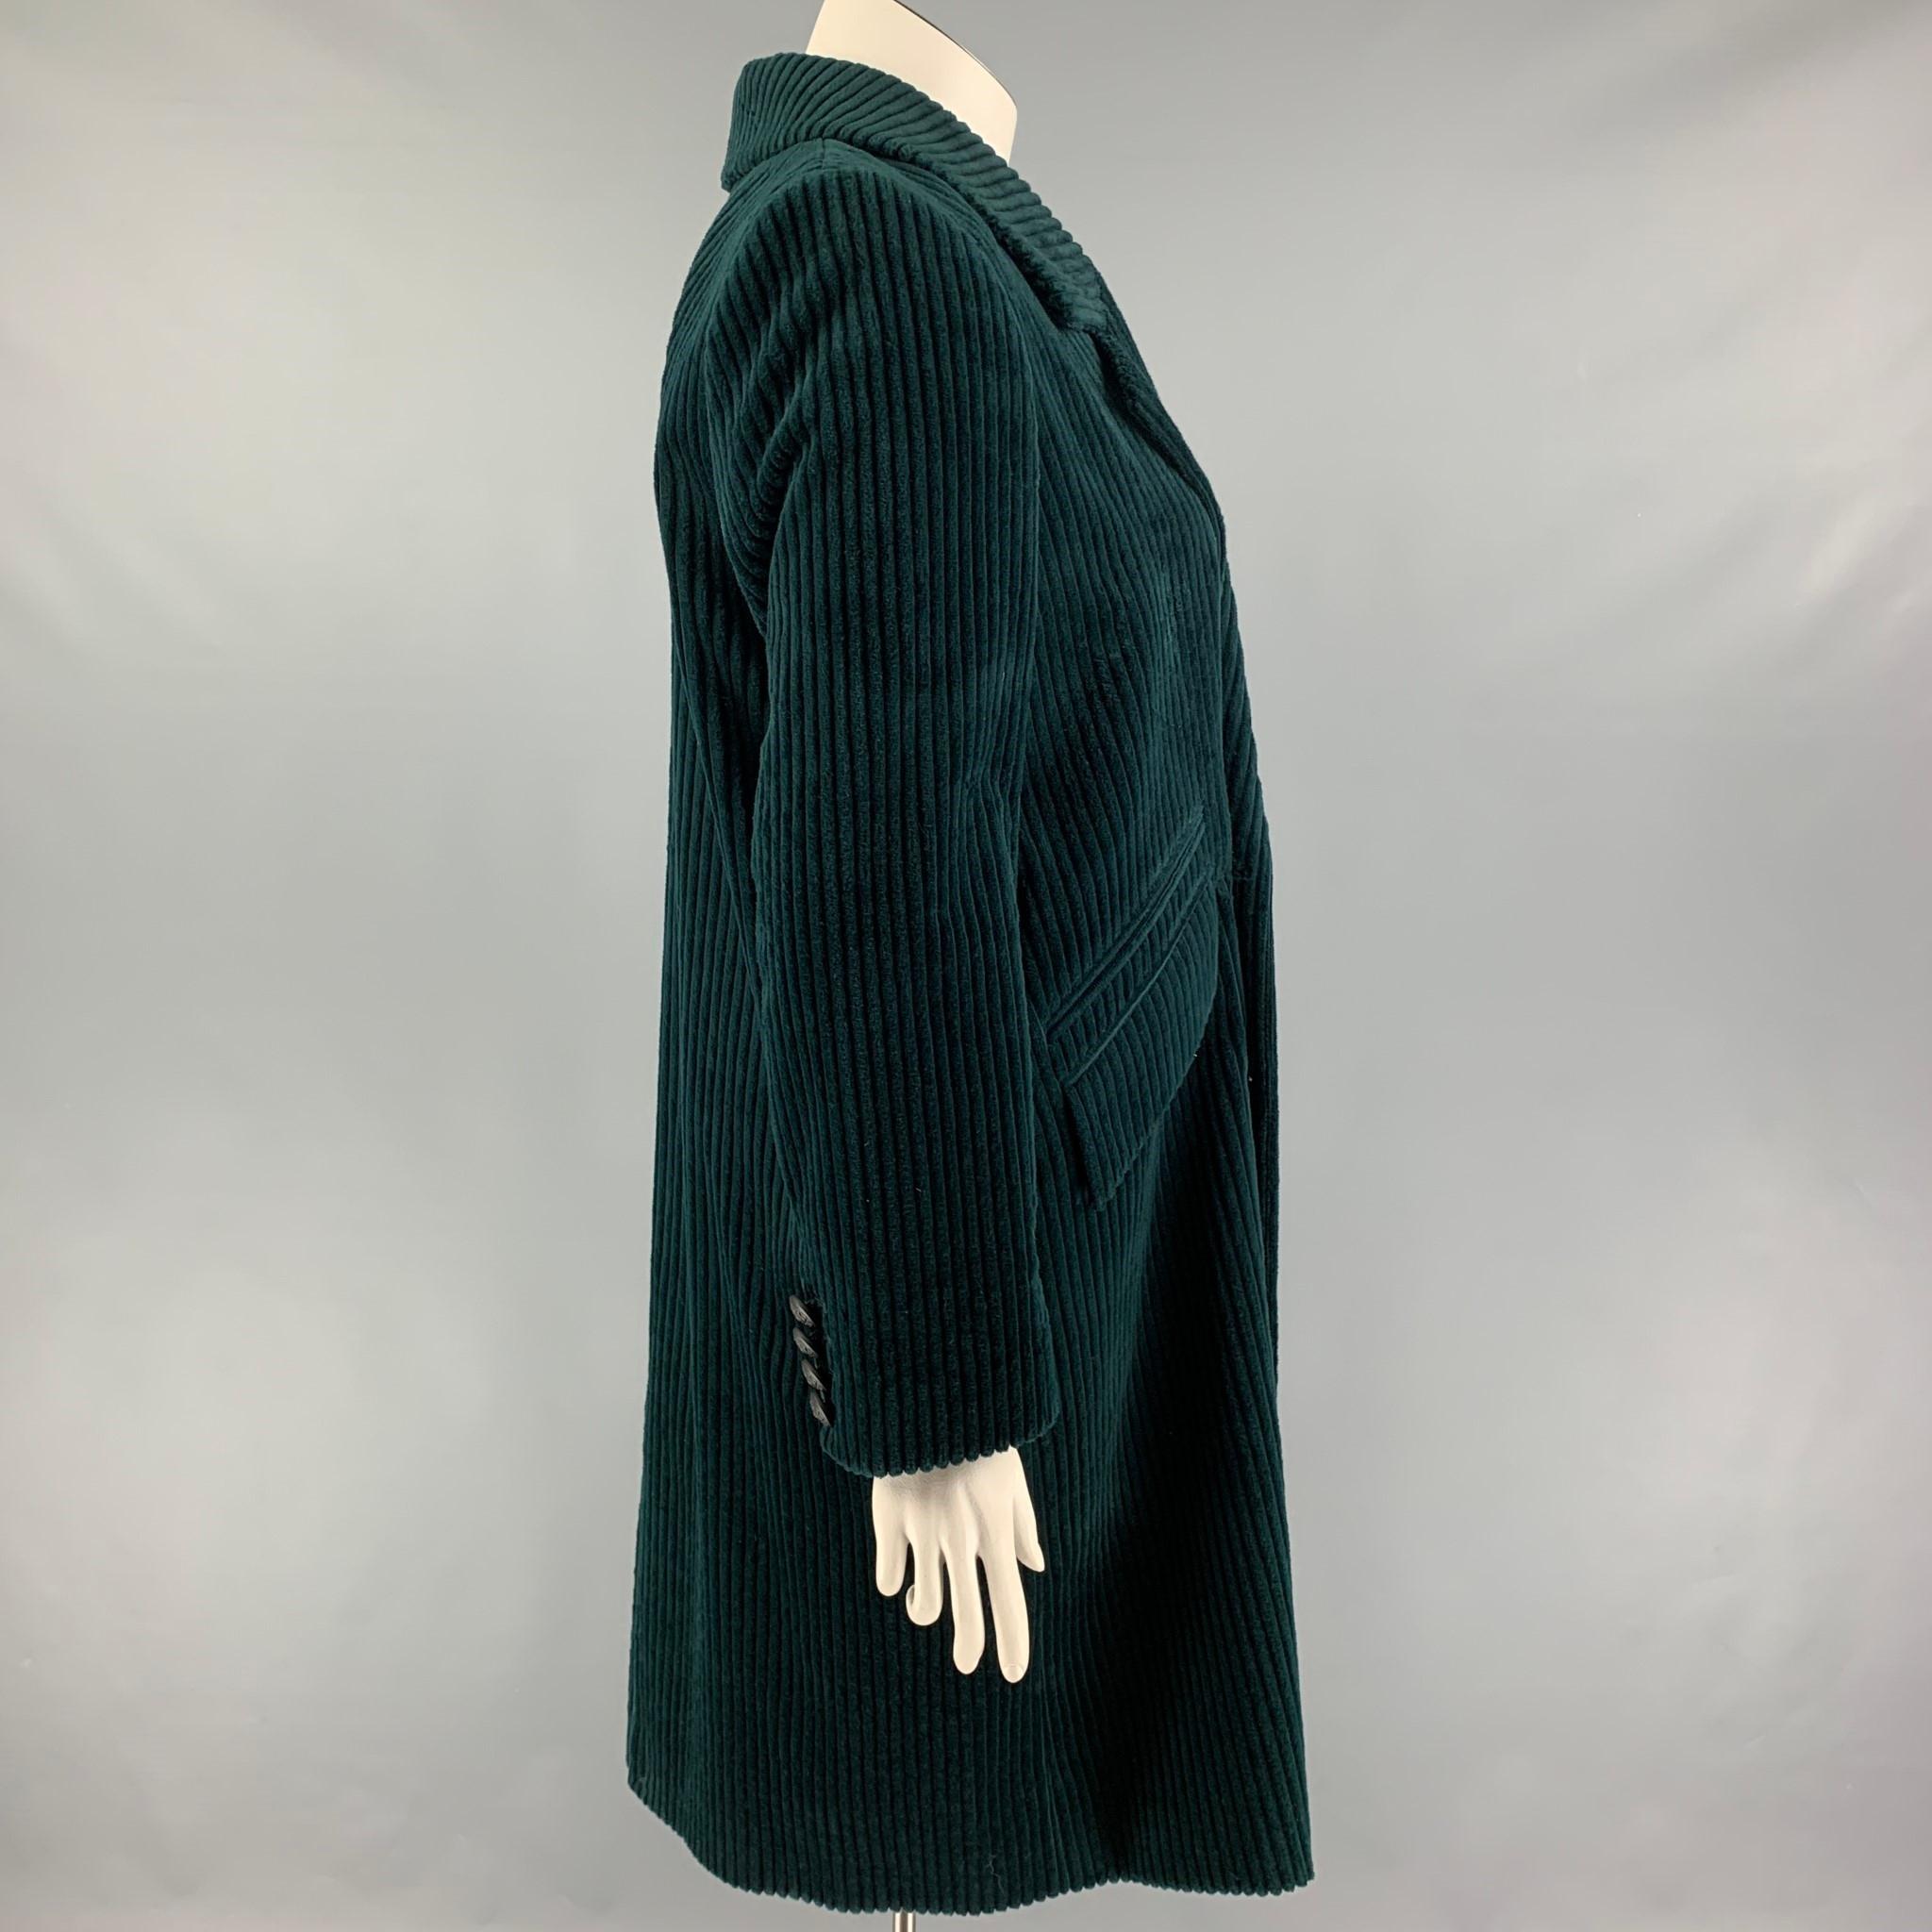 THE KOOPLES coat comes in forest green corduroy cotton with a full liner featuring a notch lapel, flap pockets, and a double breasted closure. 

New with tags. 
Marked: 40
Original Retail Price: $645.00

Measurements:

Shoulder: 16.5 in.
Bust: 42